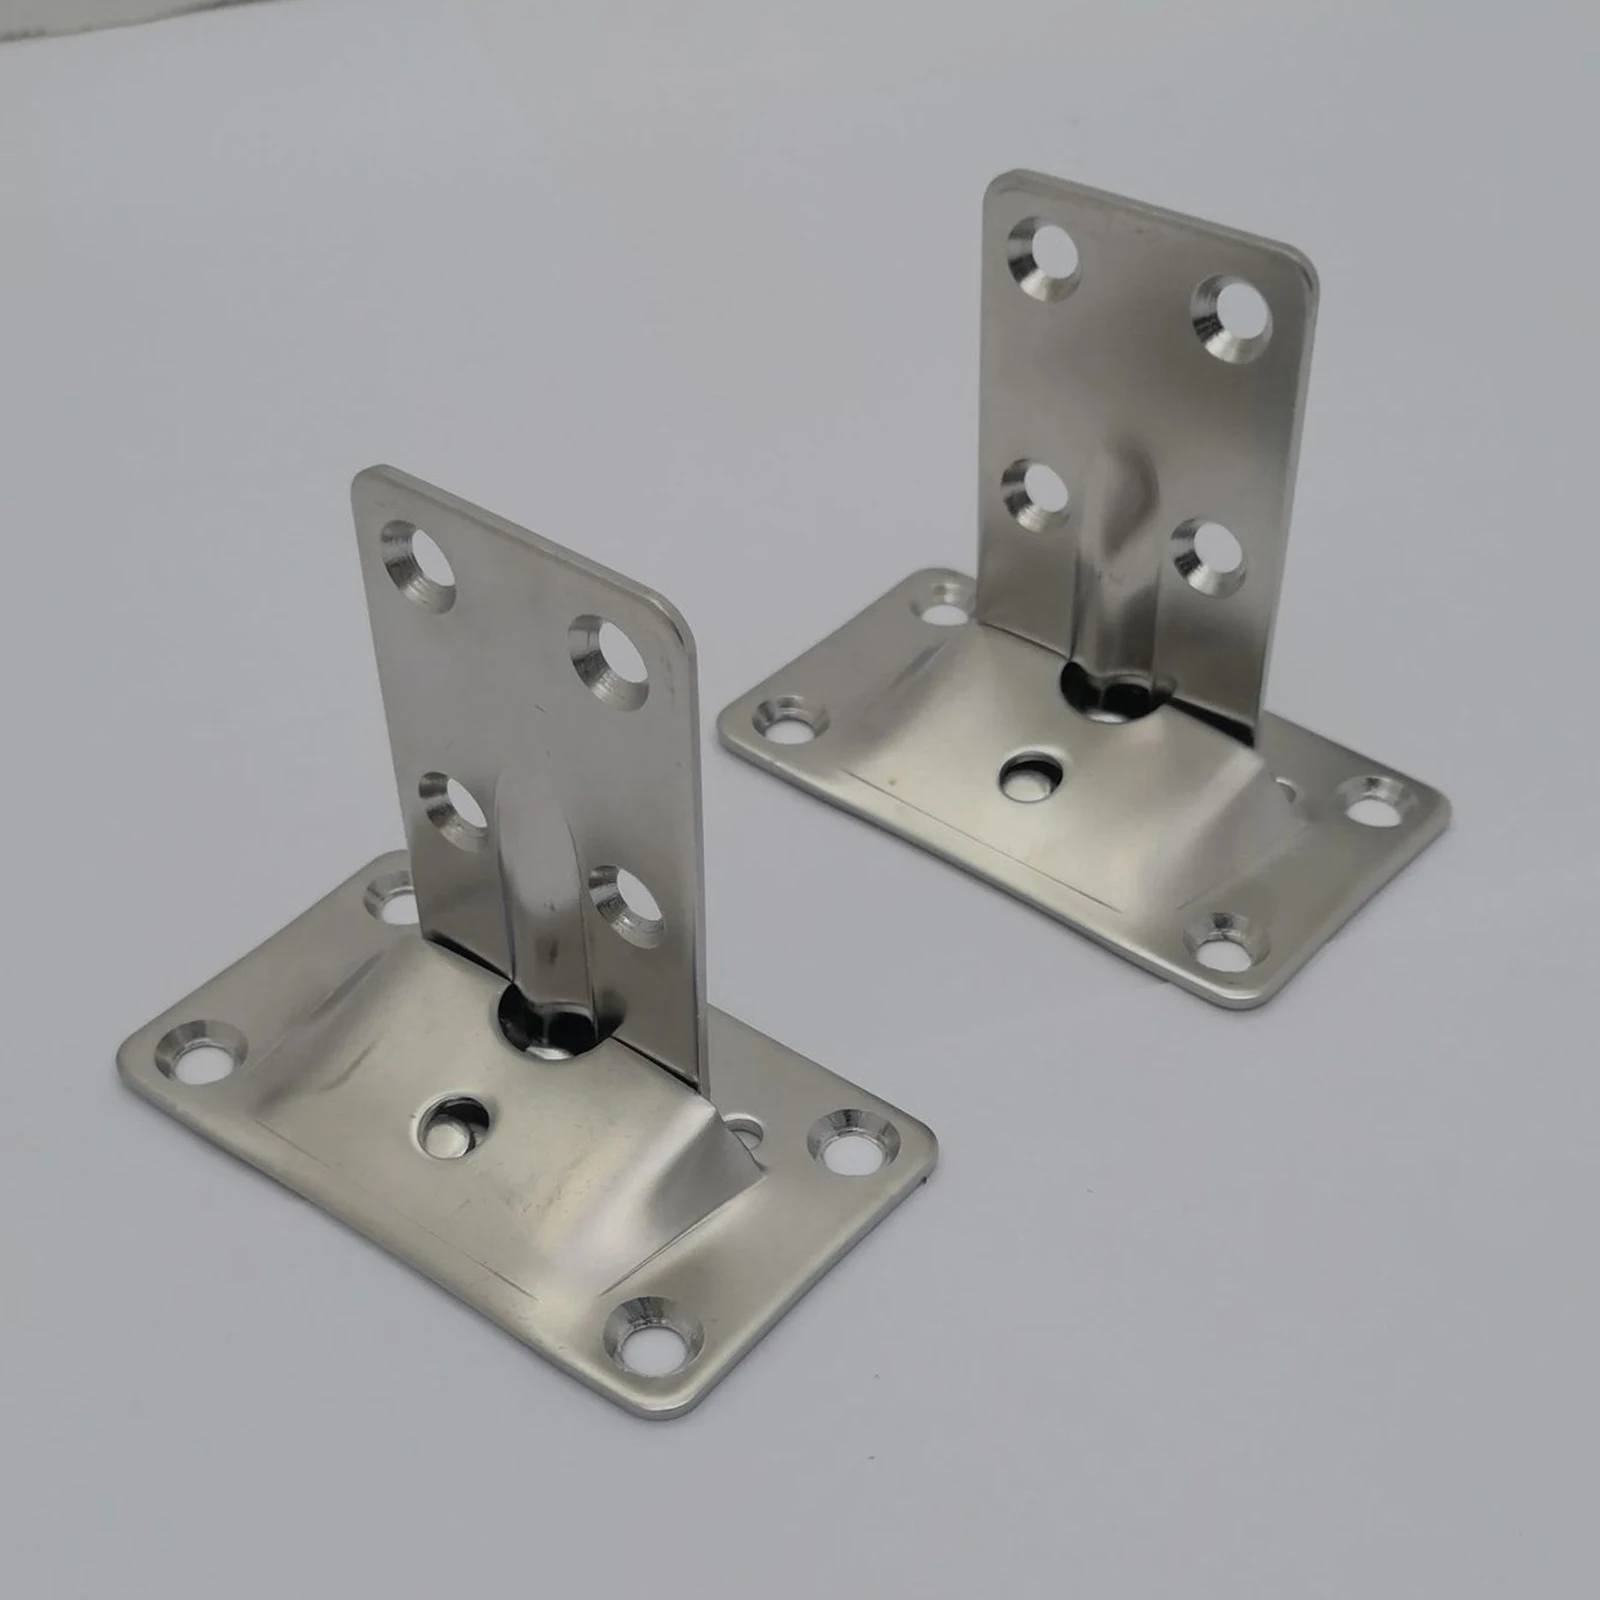 Marine Stainless Steel Table Bracket Set Removable Multiple Usage for House Boats Marine Accessories Hardware